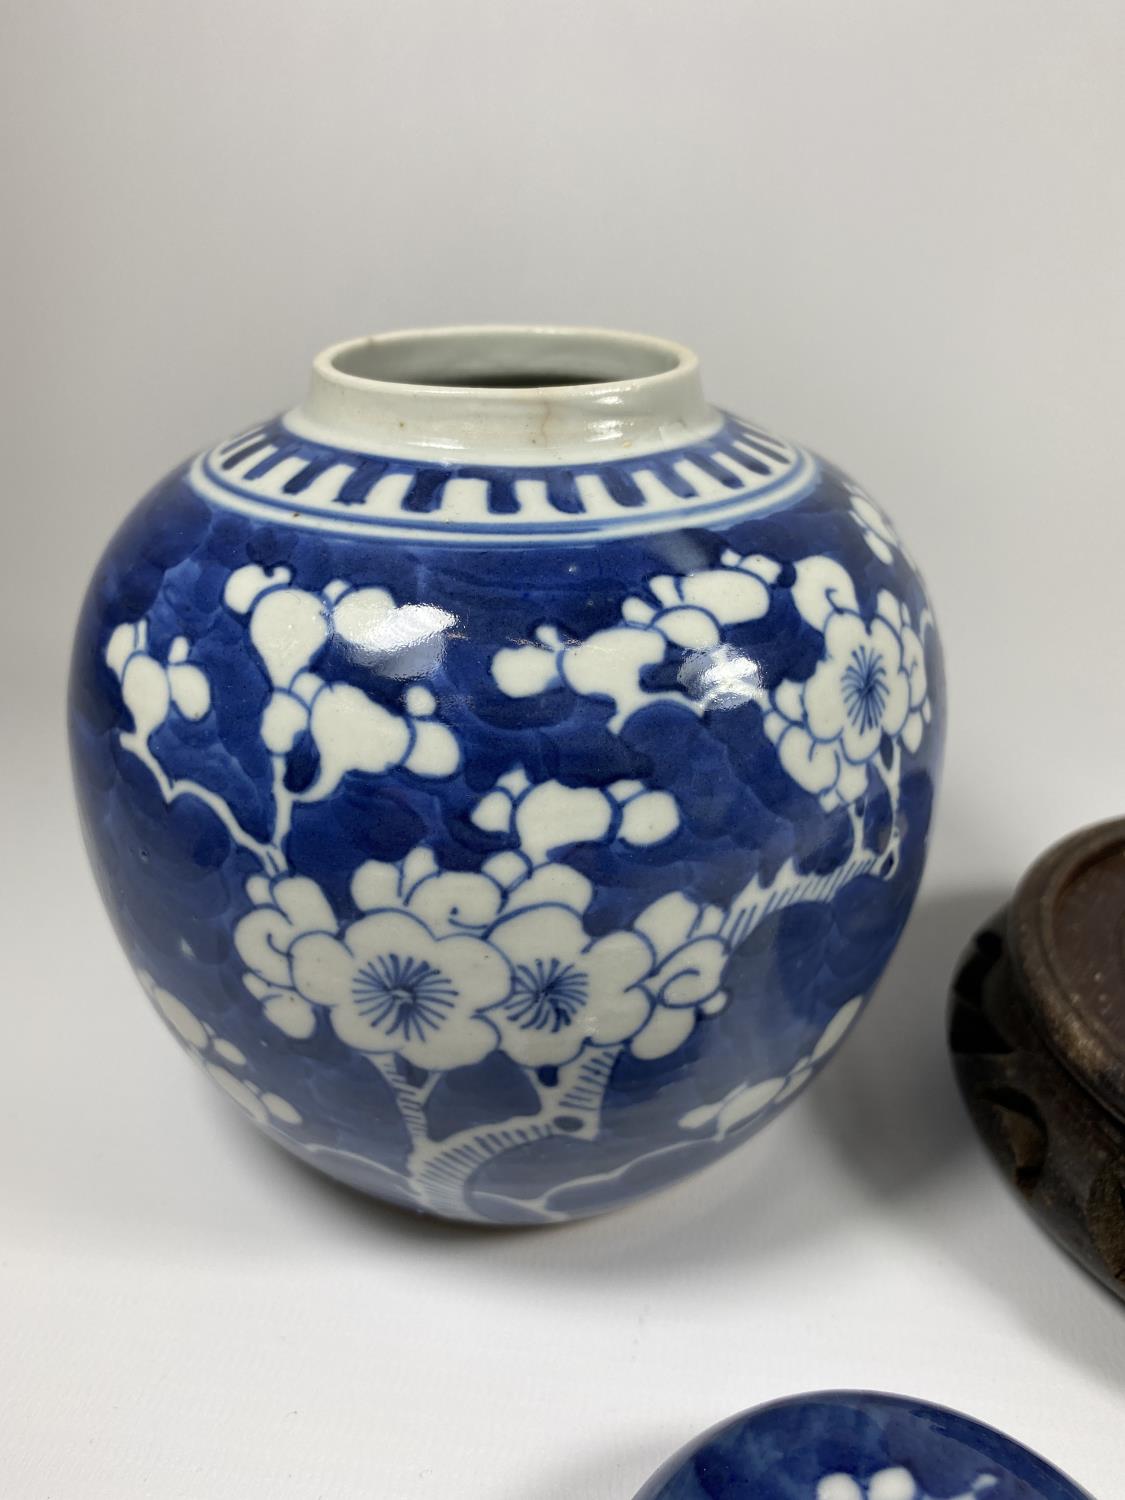 A LATE 19TH CENTURY CHINESE PORCELAIN PRUNUS BLOSSOM PATTERN GINGER JAR ON WOODEN BASE, DOUBLE - Image 3 of 7